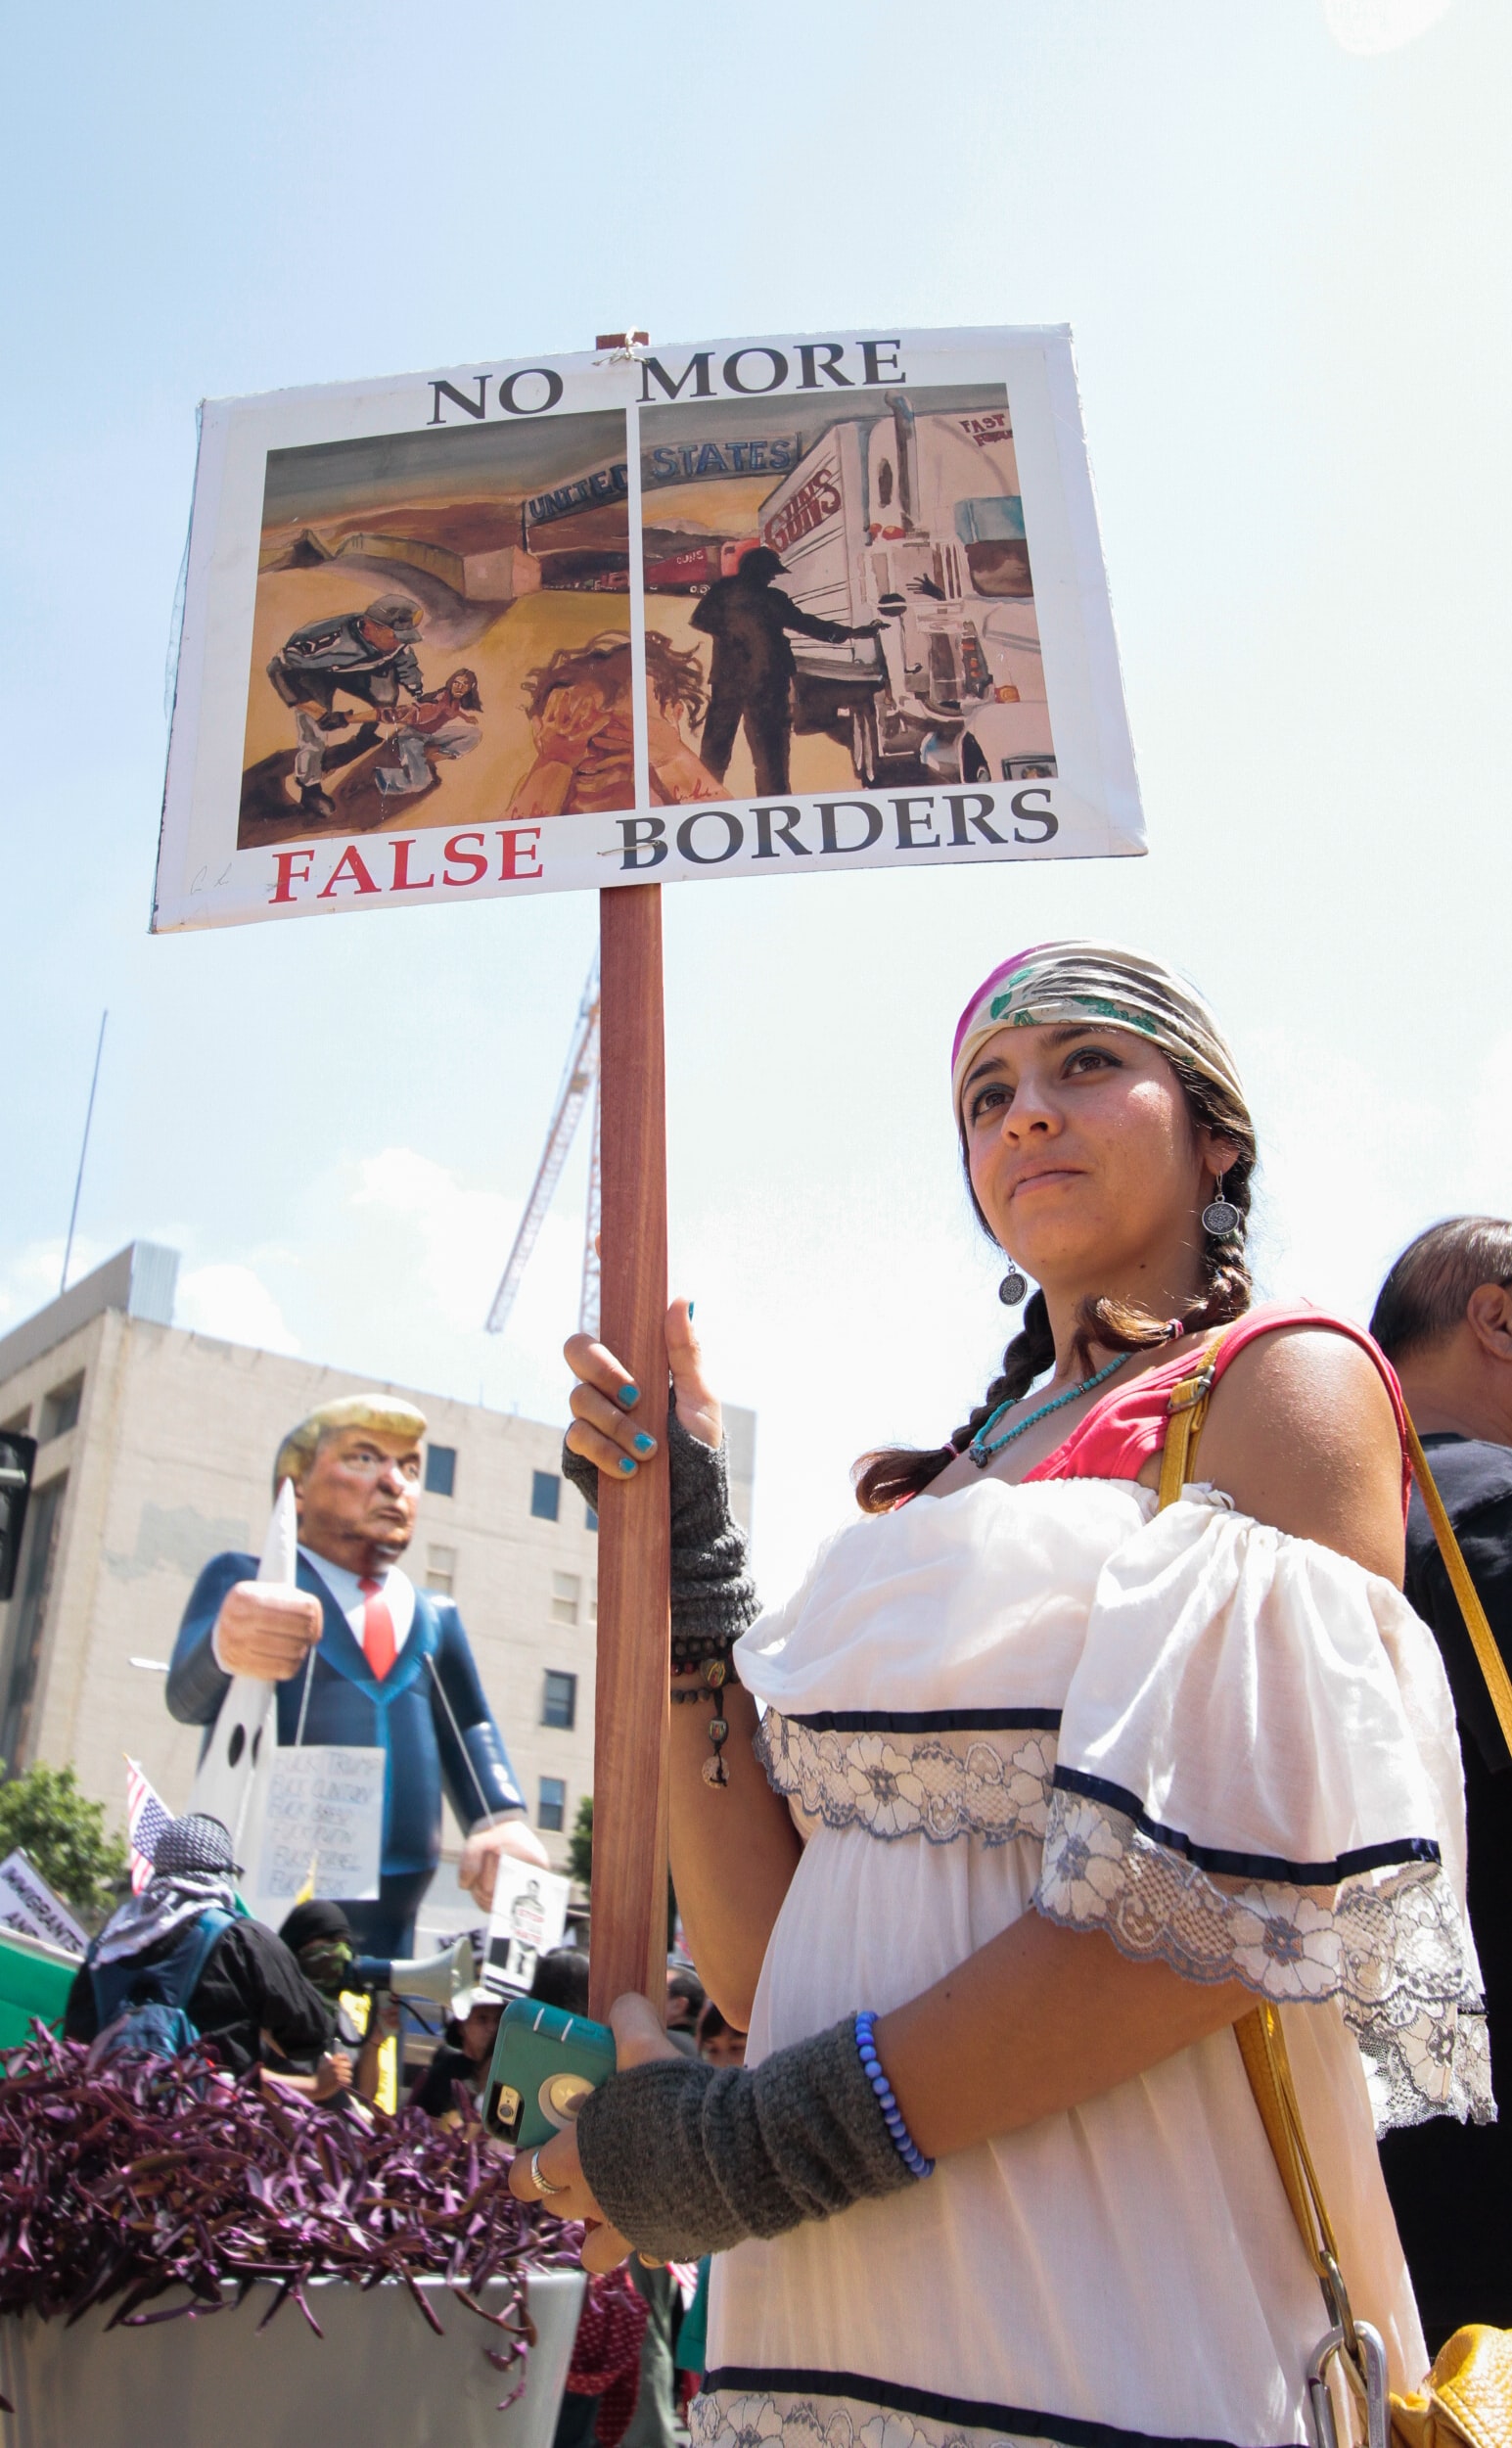 Photo of a young woman taking part in a peaceful protest, demonstrating the Trump Administration's border and Immigration policies. She is carrying a protest sign that says "No more False Borders." The sign shows an immigration officer throwing a person to the ground on one side, and on the other side the image shows semi truck after semi truck carrying guns going right past border officials.